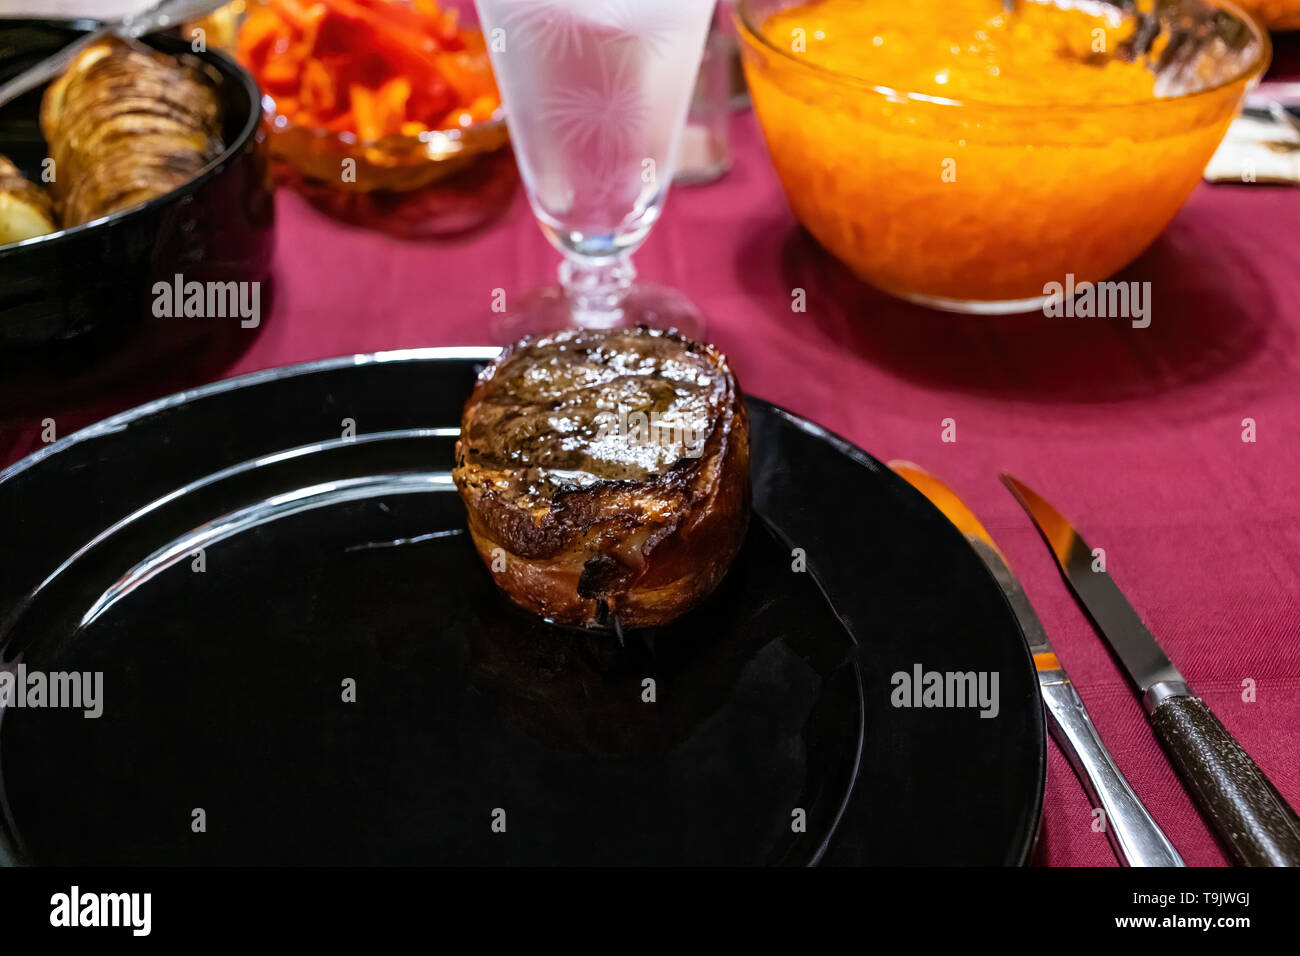 a grilled filet mignon steak on a plate waiting for dinner Stock Photo